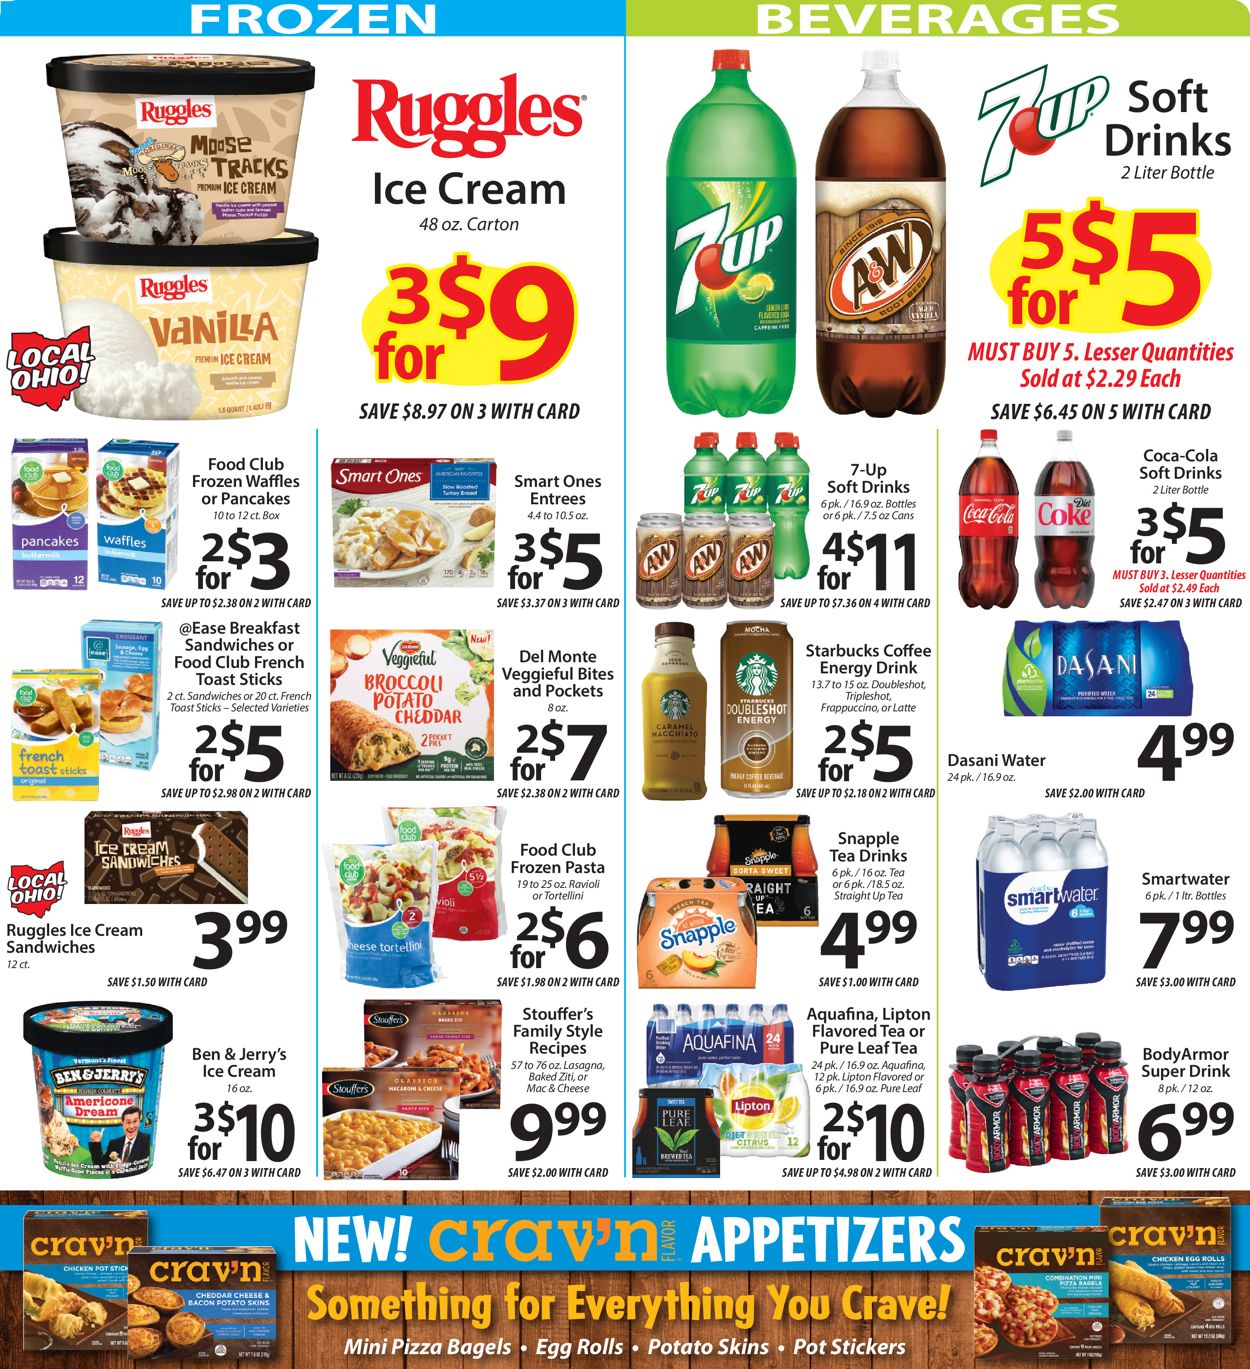 Acme Fresh Market Ad from 02/25/2021